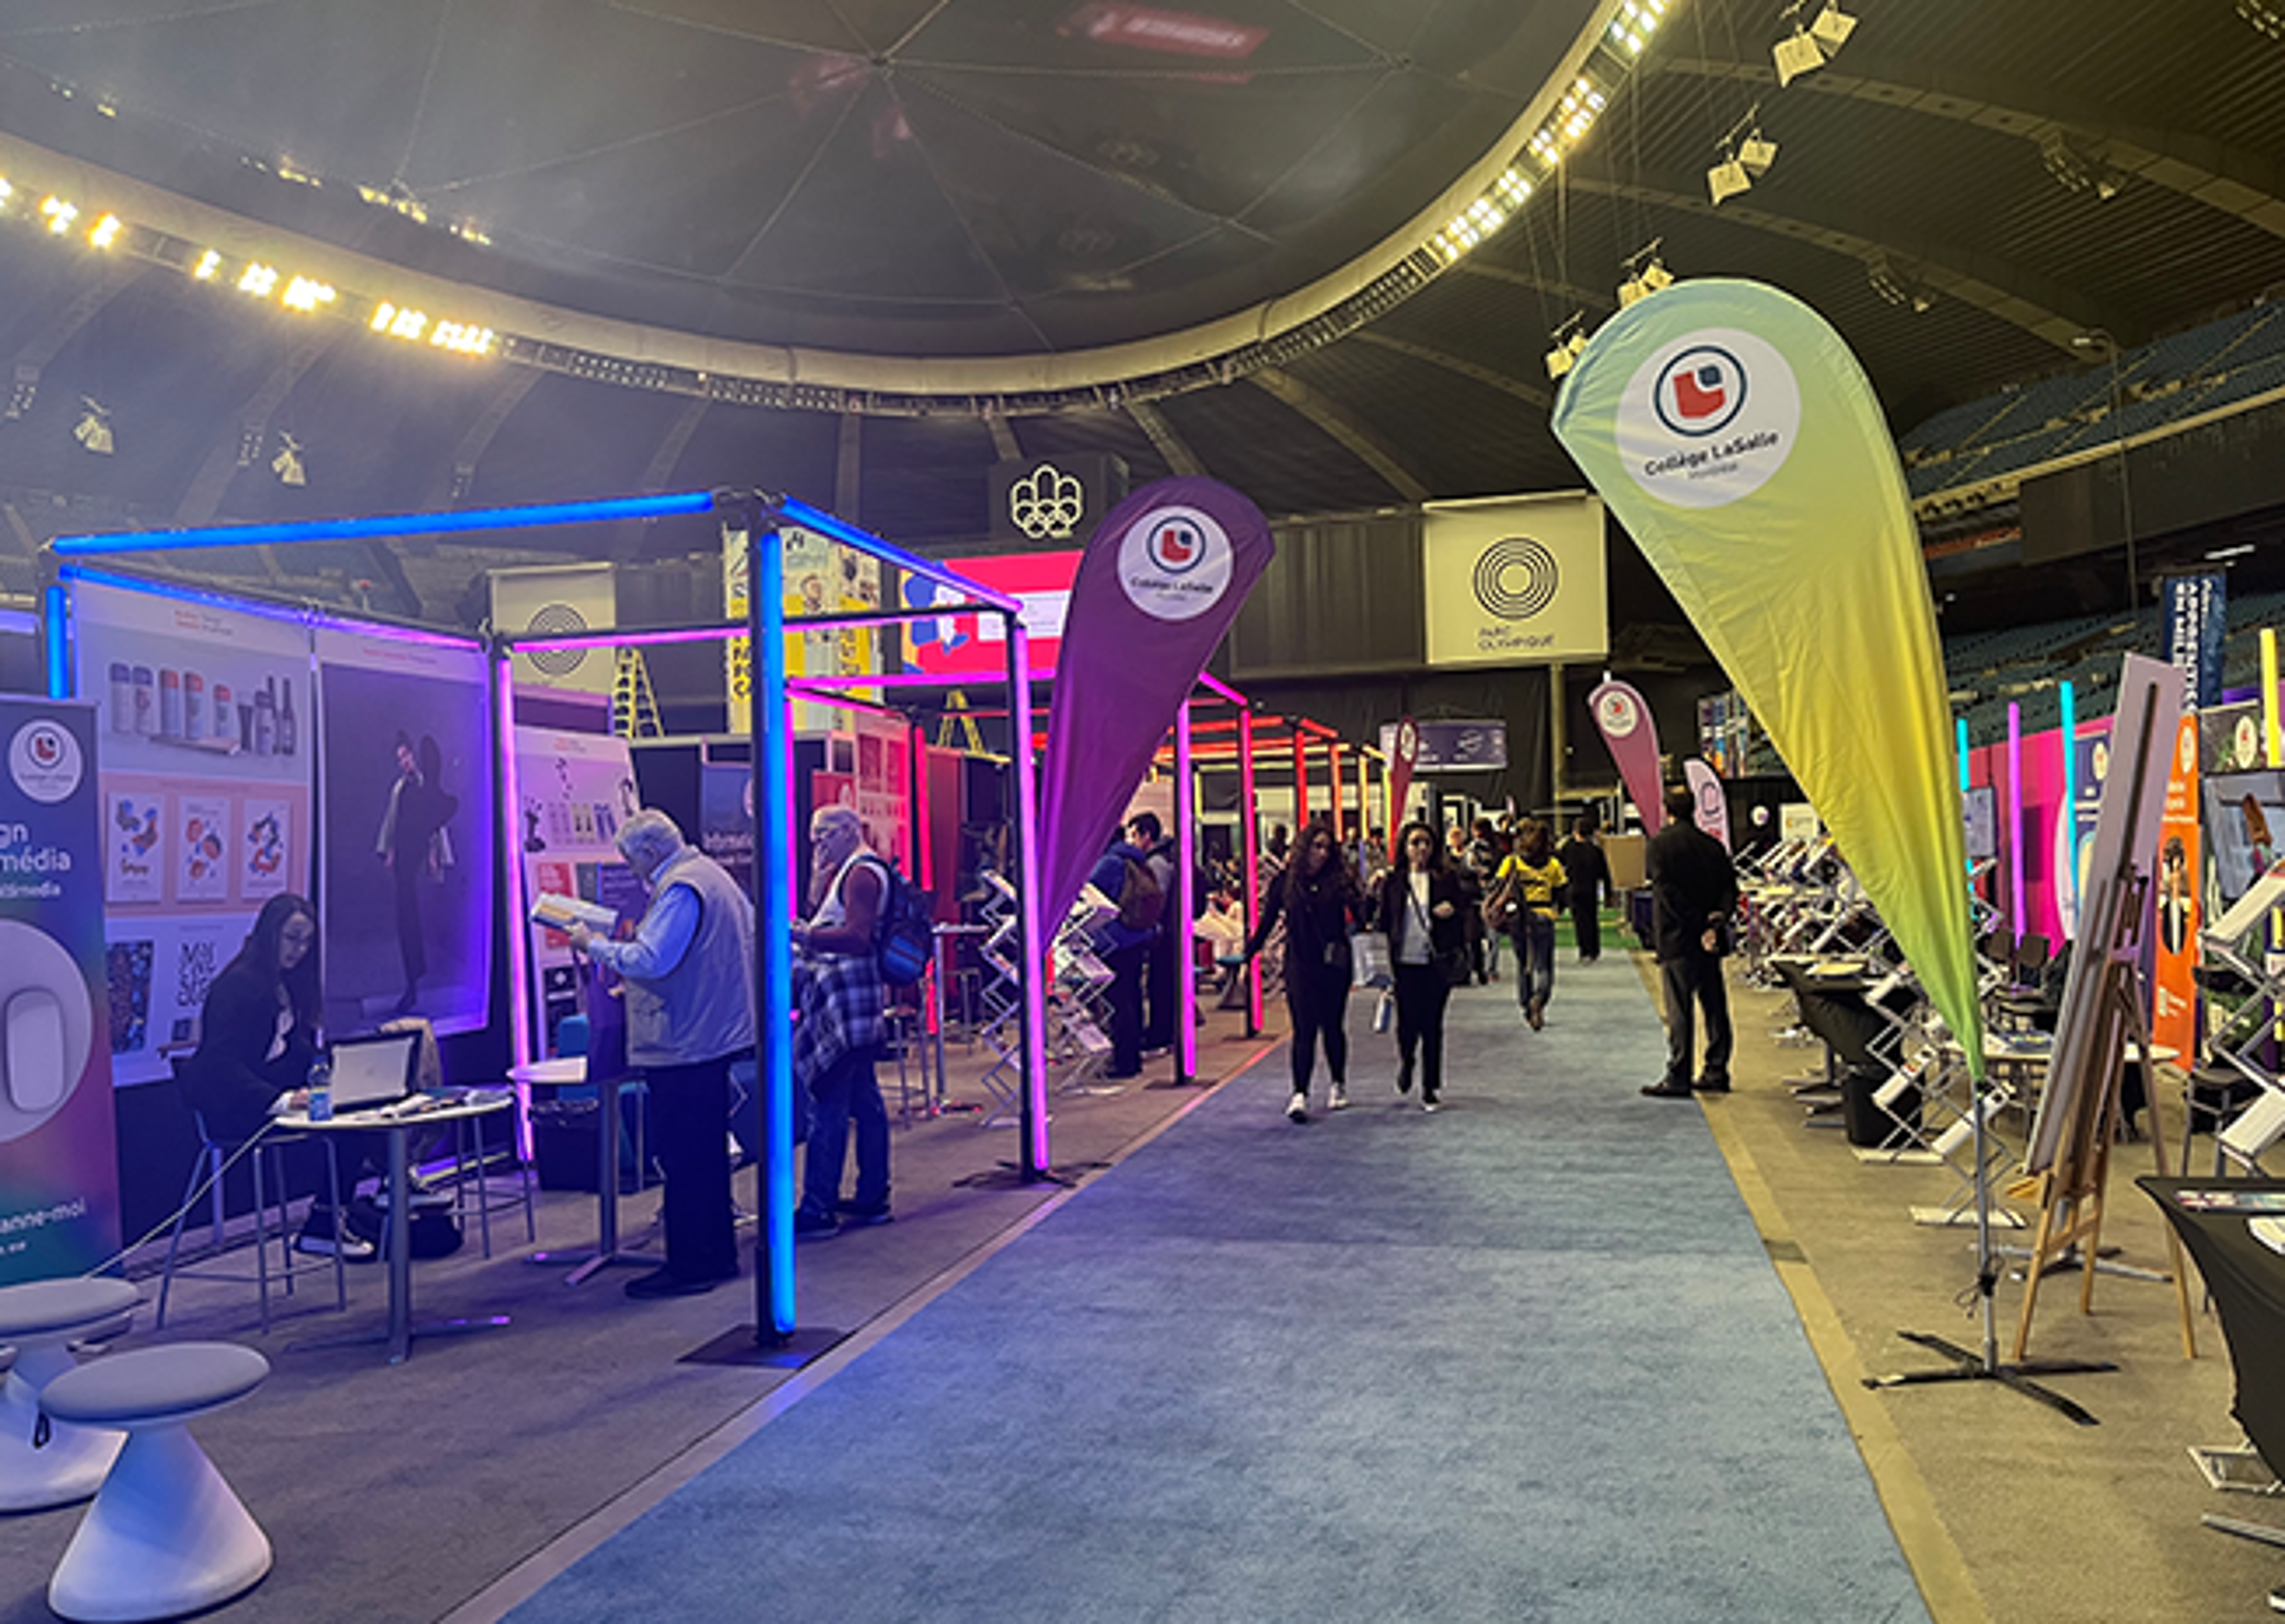 Attendees exploring various educational booths with vibrant displays and banners, including one for Collège LaSalle, inside an exhibition hall.